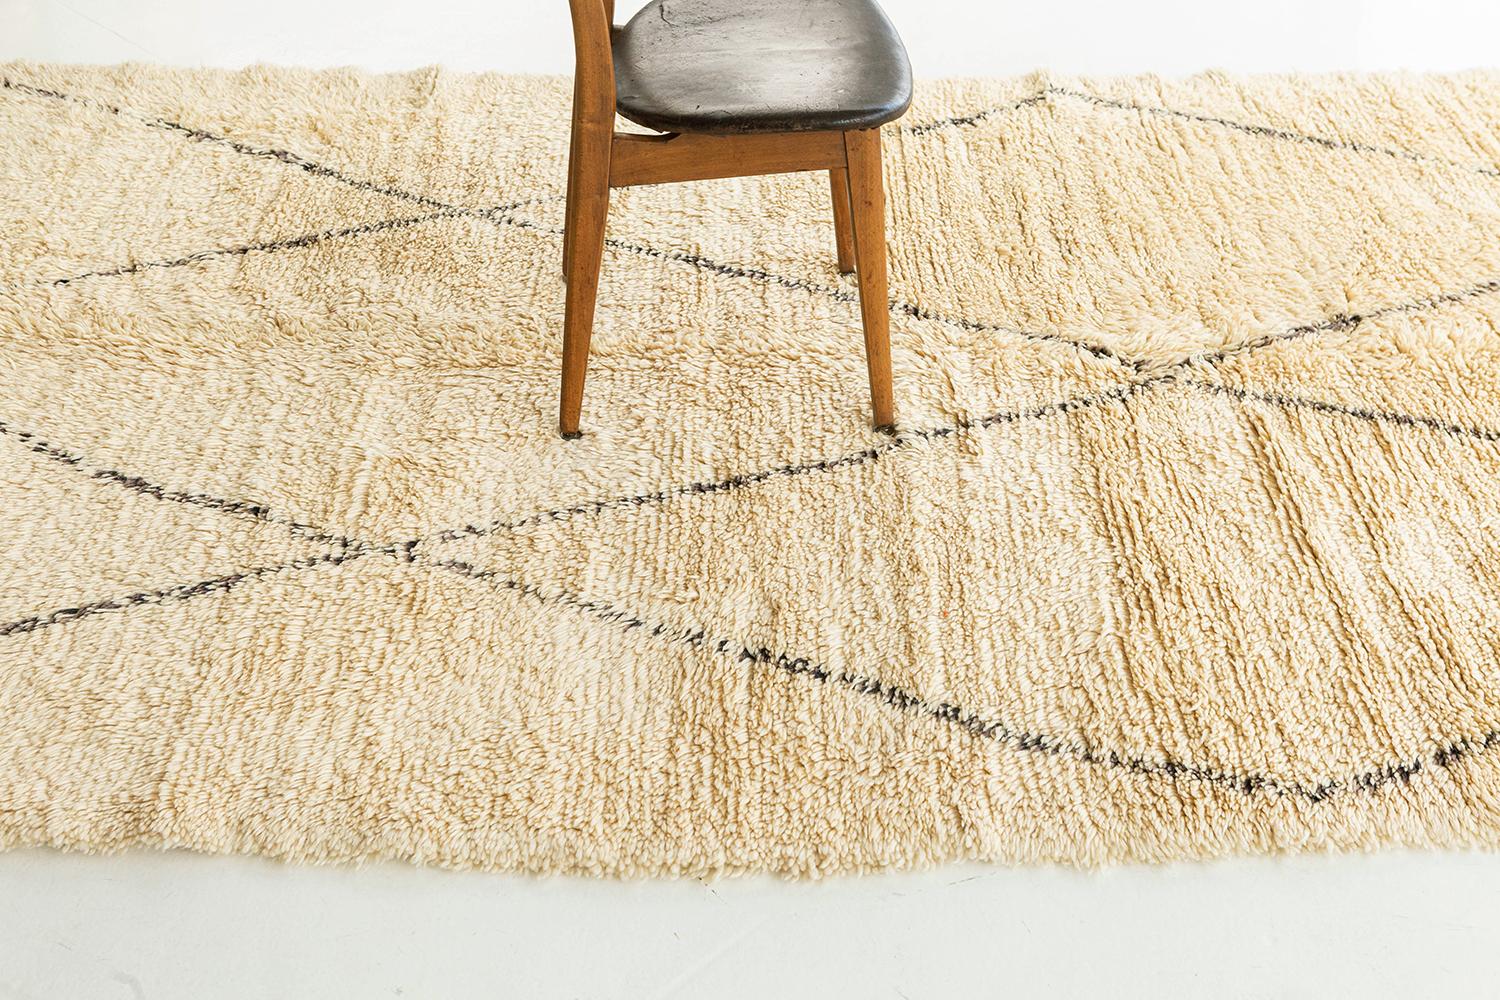 A minimalist look of High Atlas Moroccan rug features clay lozenges with extended sides that has diamond pattern in an ivory field. Simple but very classy rug with vertically aligned diamonds in allover design. This rug embodies the contemporary